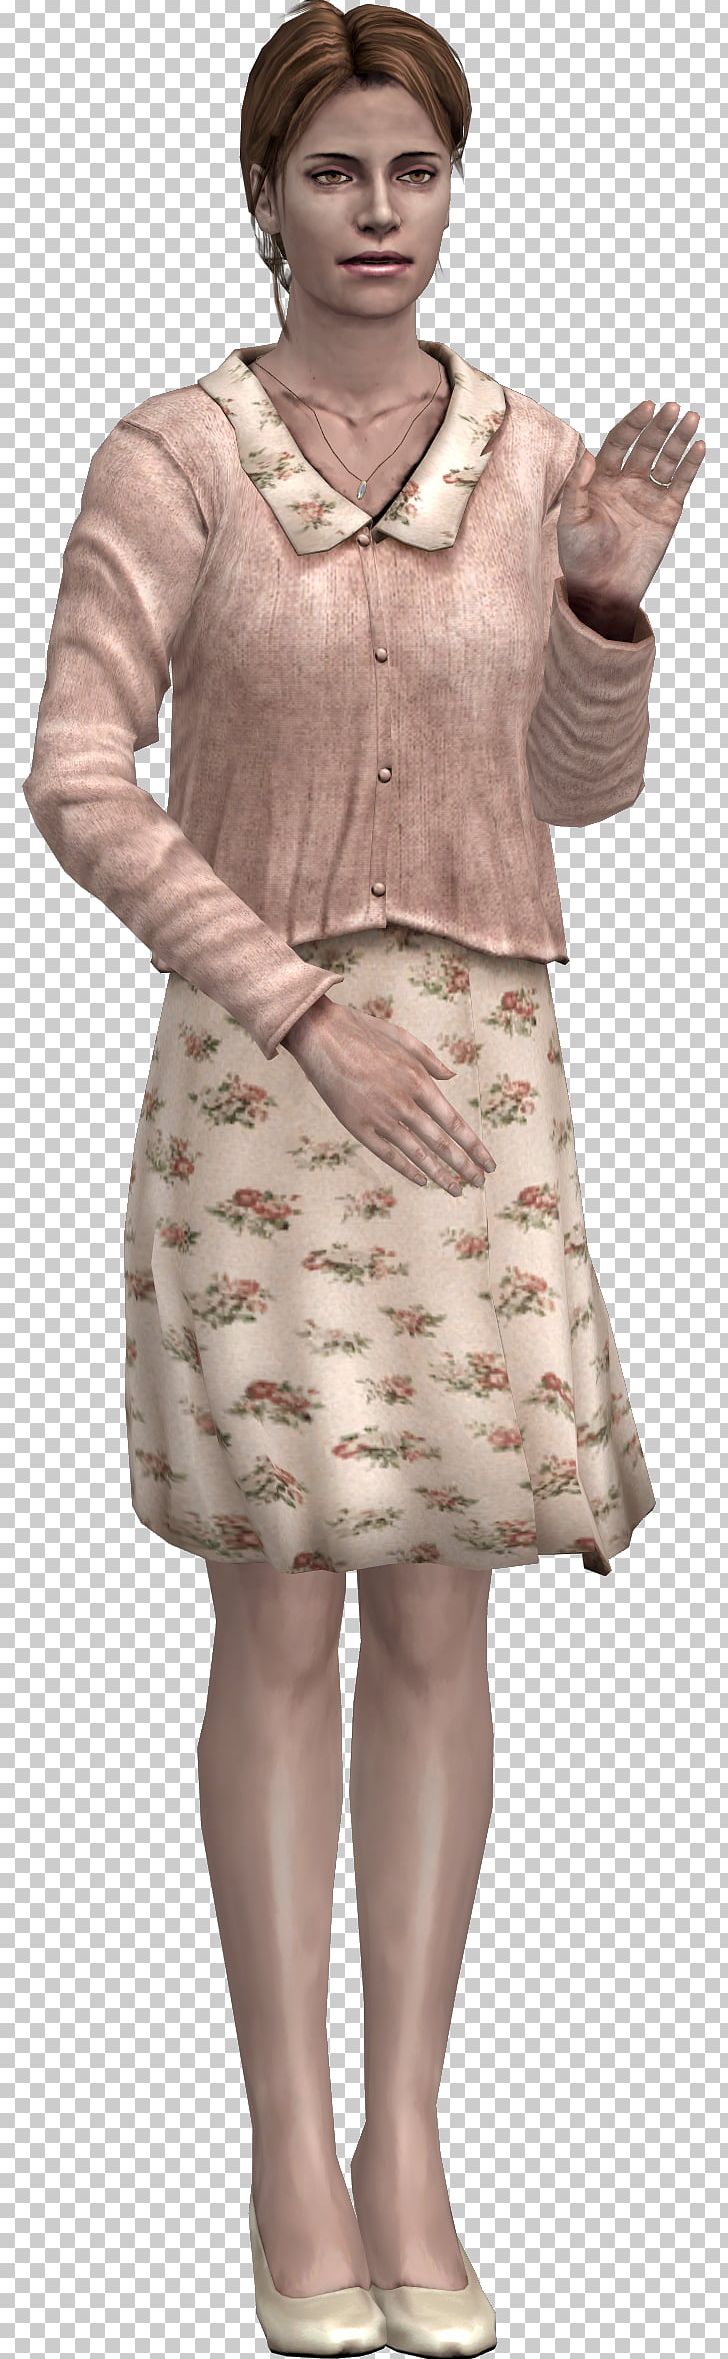 Silent Hill 2 Pyramid Head Video Game Mary Shepherd-Sunderland PNG, Clipart, Art, Beige, Costume, Costume Design, Fashion Model Free PNG Download